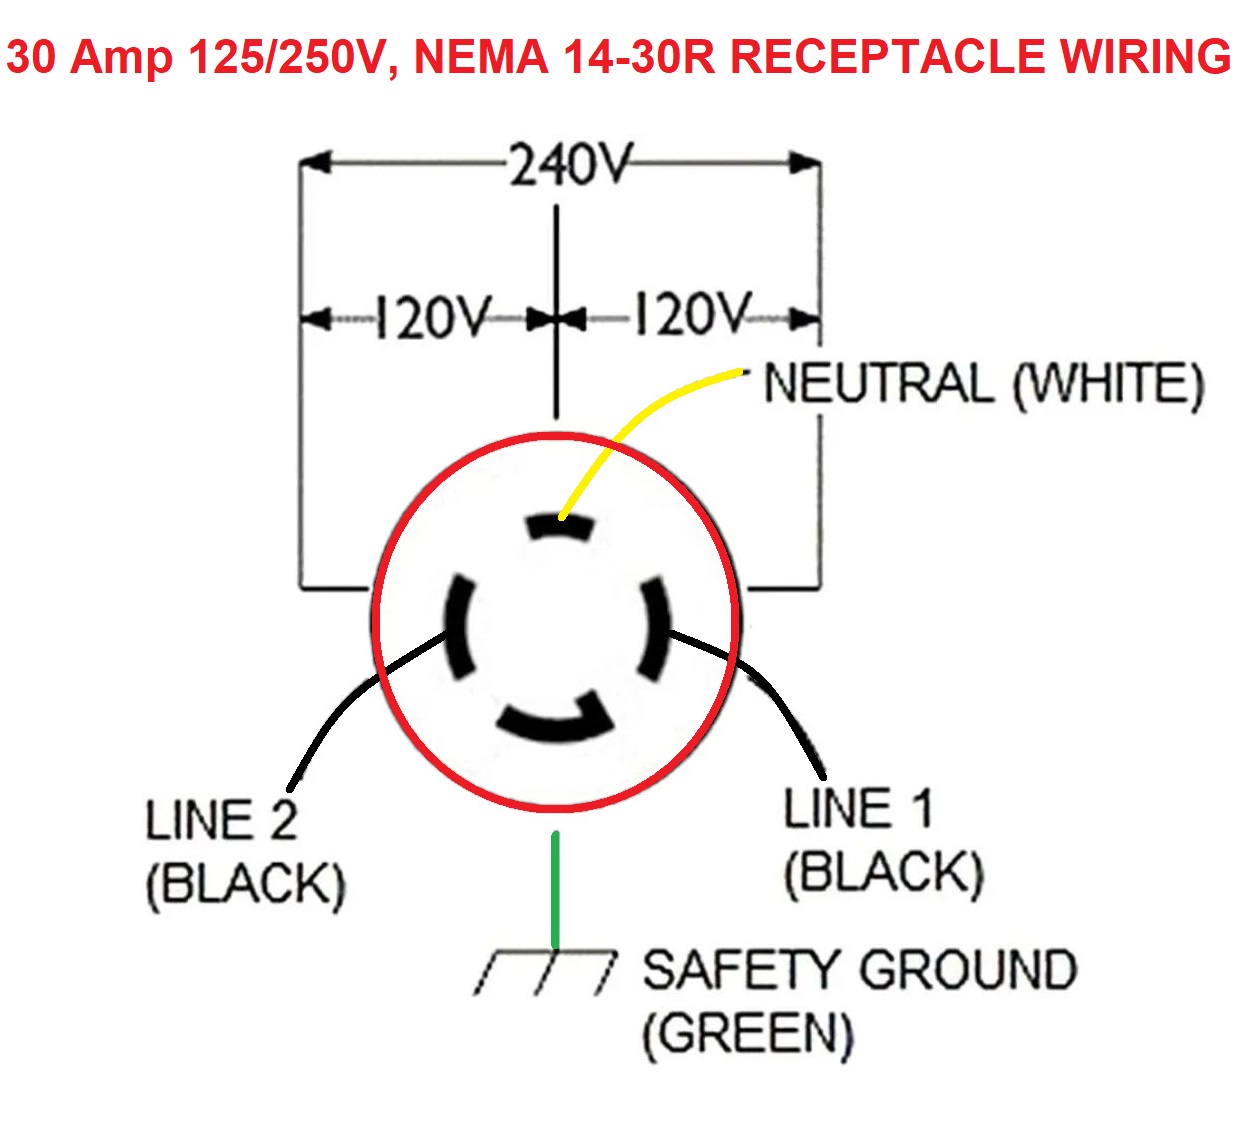 Electrical Wire Size Required for Receptacles, How to choose the proper wire  size for an electrical plug outlet or wall plug  20 Amp 125 Volt Plug Wiring Diagram    InspectAPedia.com